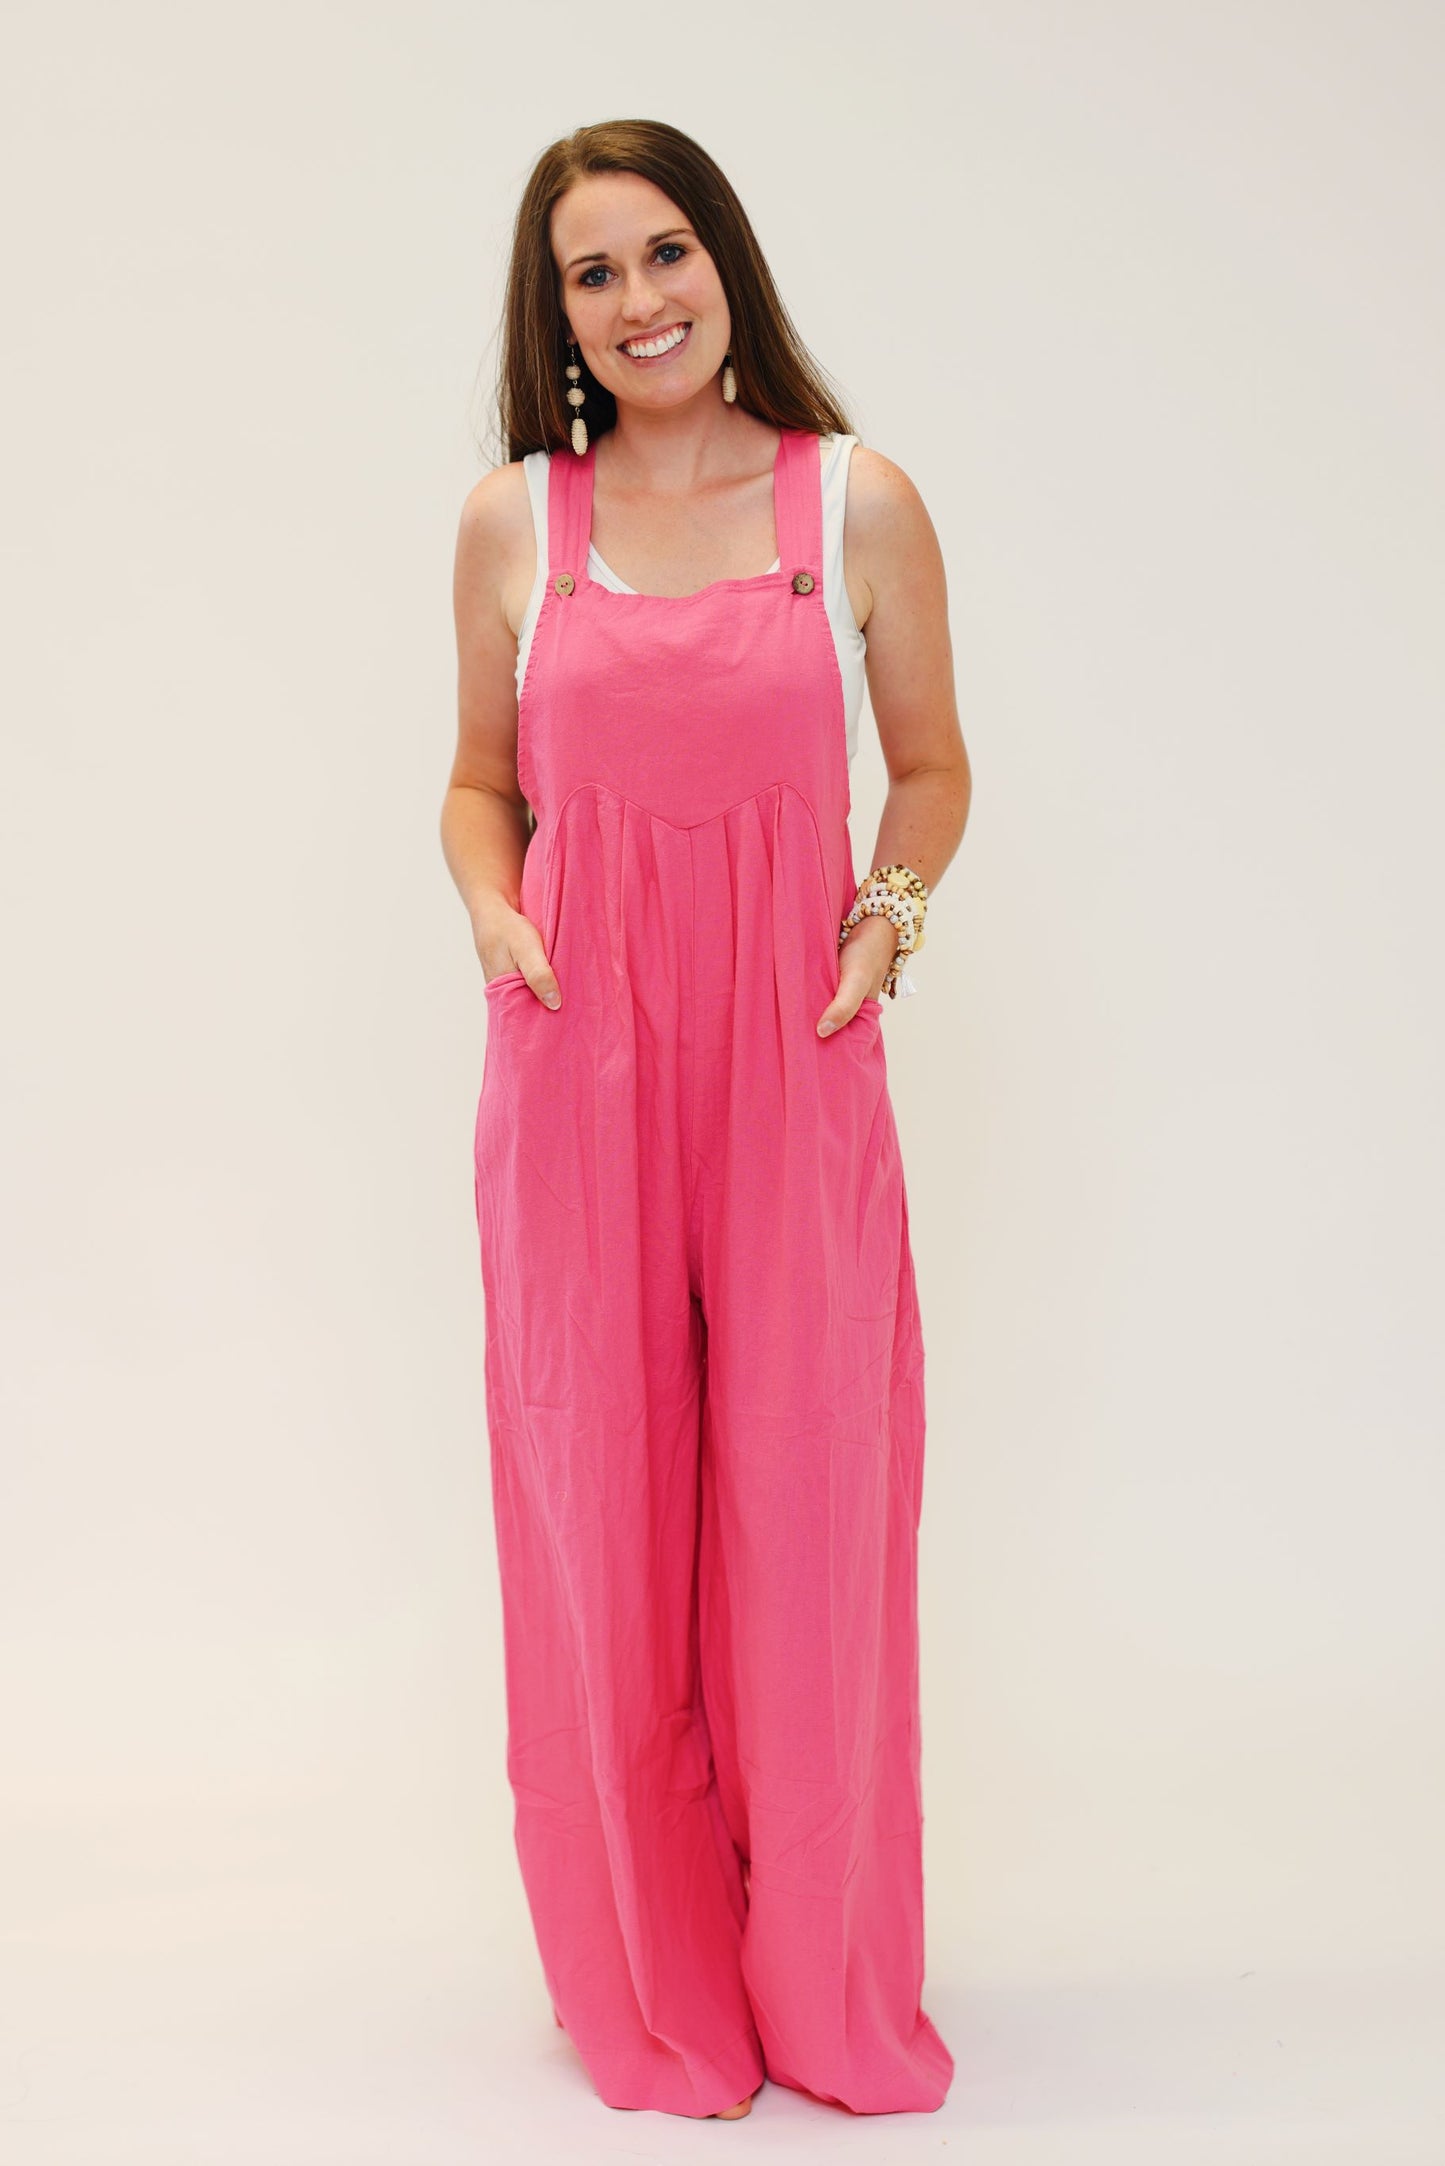 All About Fun Jumpsuit (S-XL)